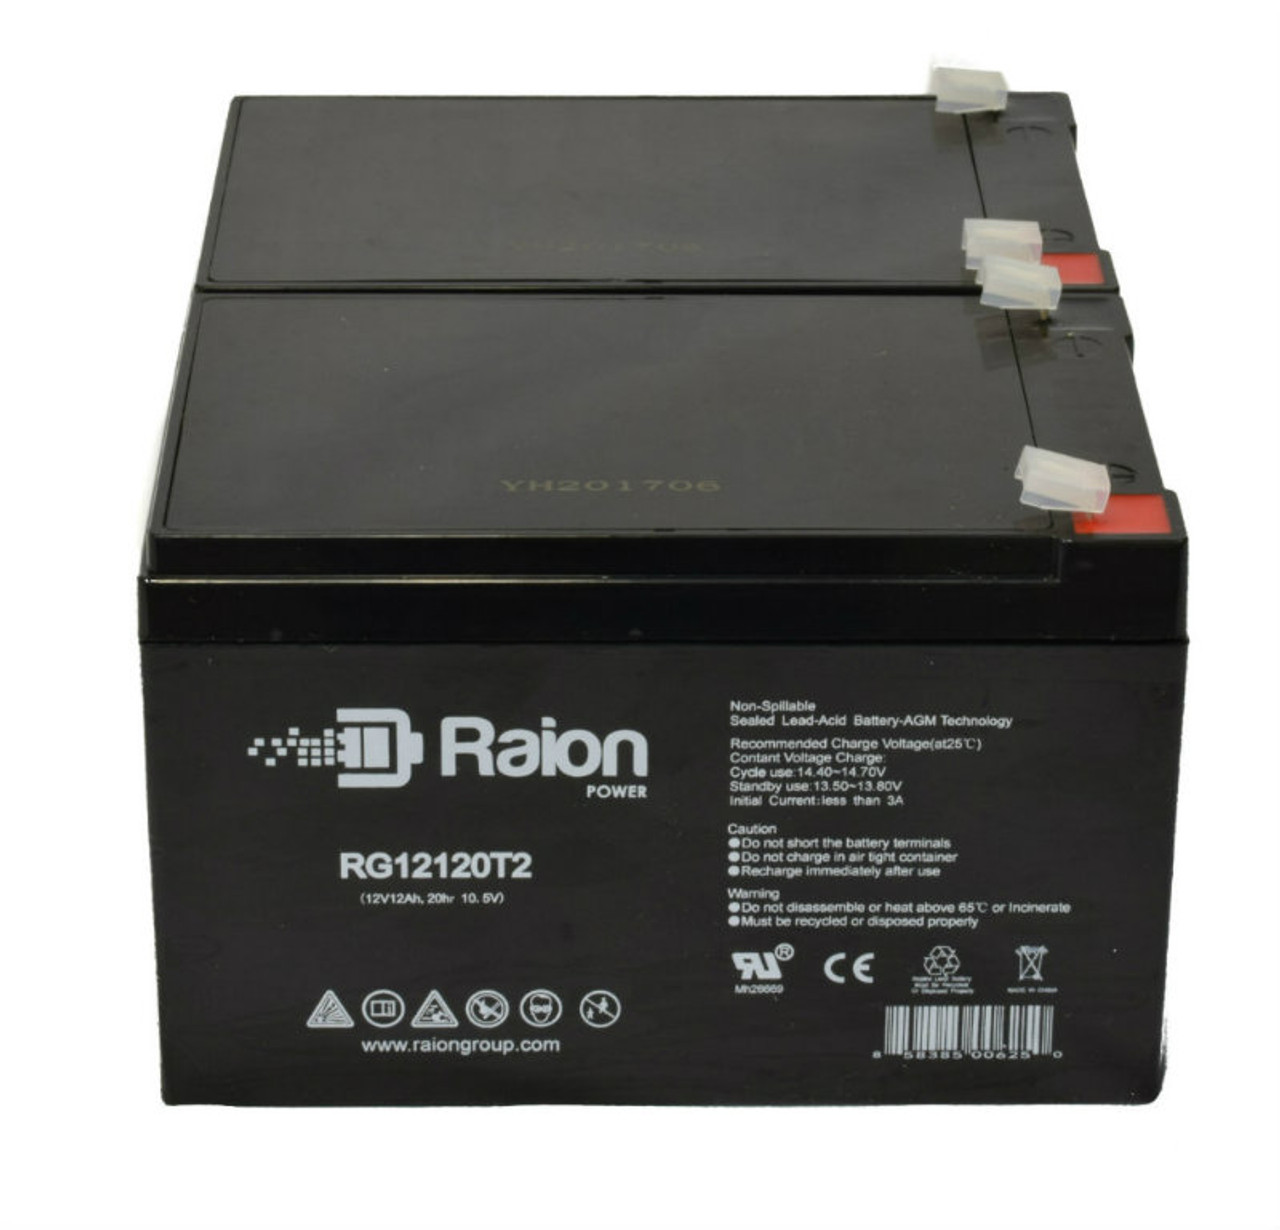 Raion Power 12V 12Ah Non-Spillable Compatible Replacement Battery for MATRIX NP12-12 - (2 Pack)